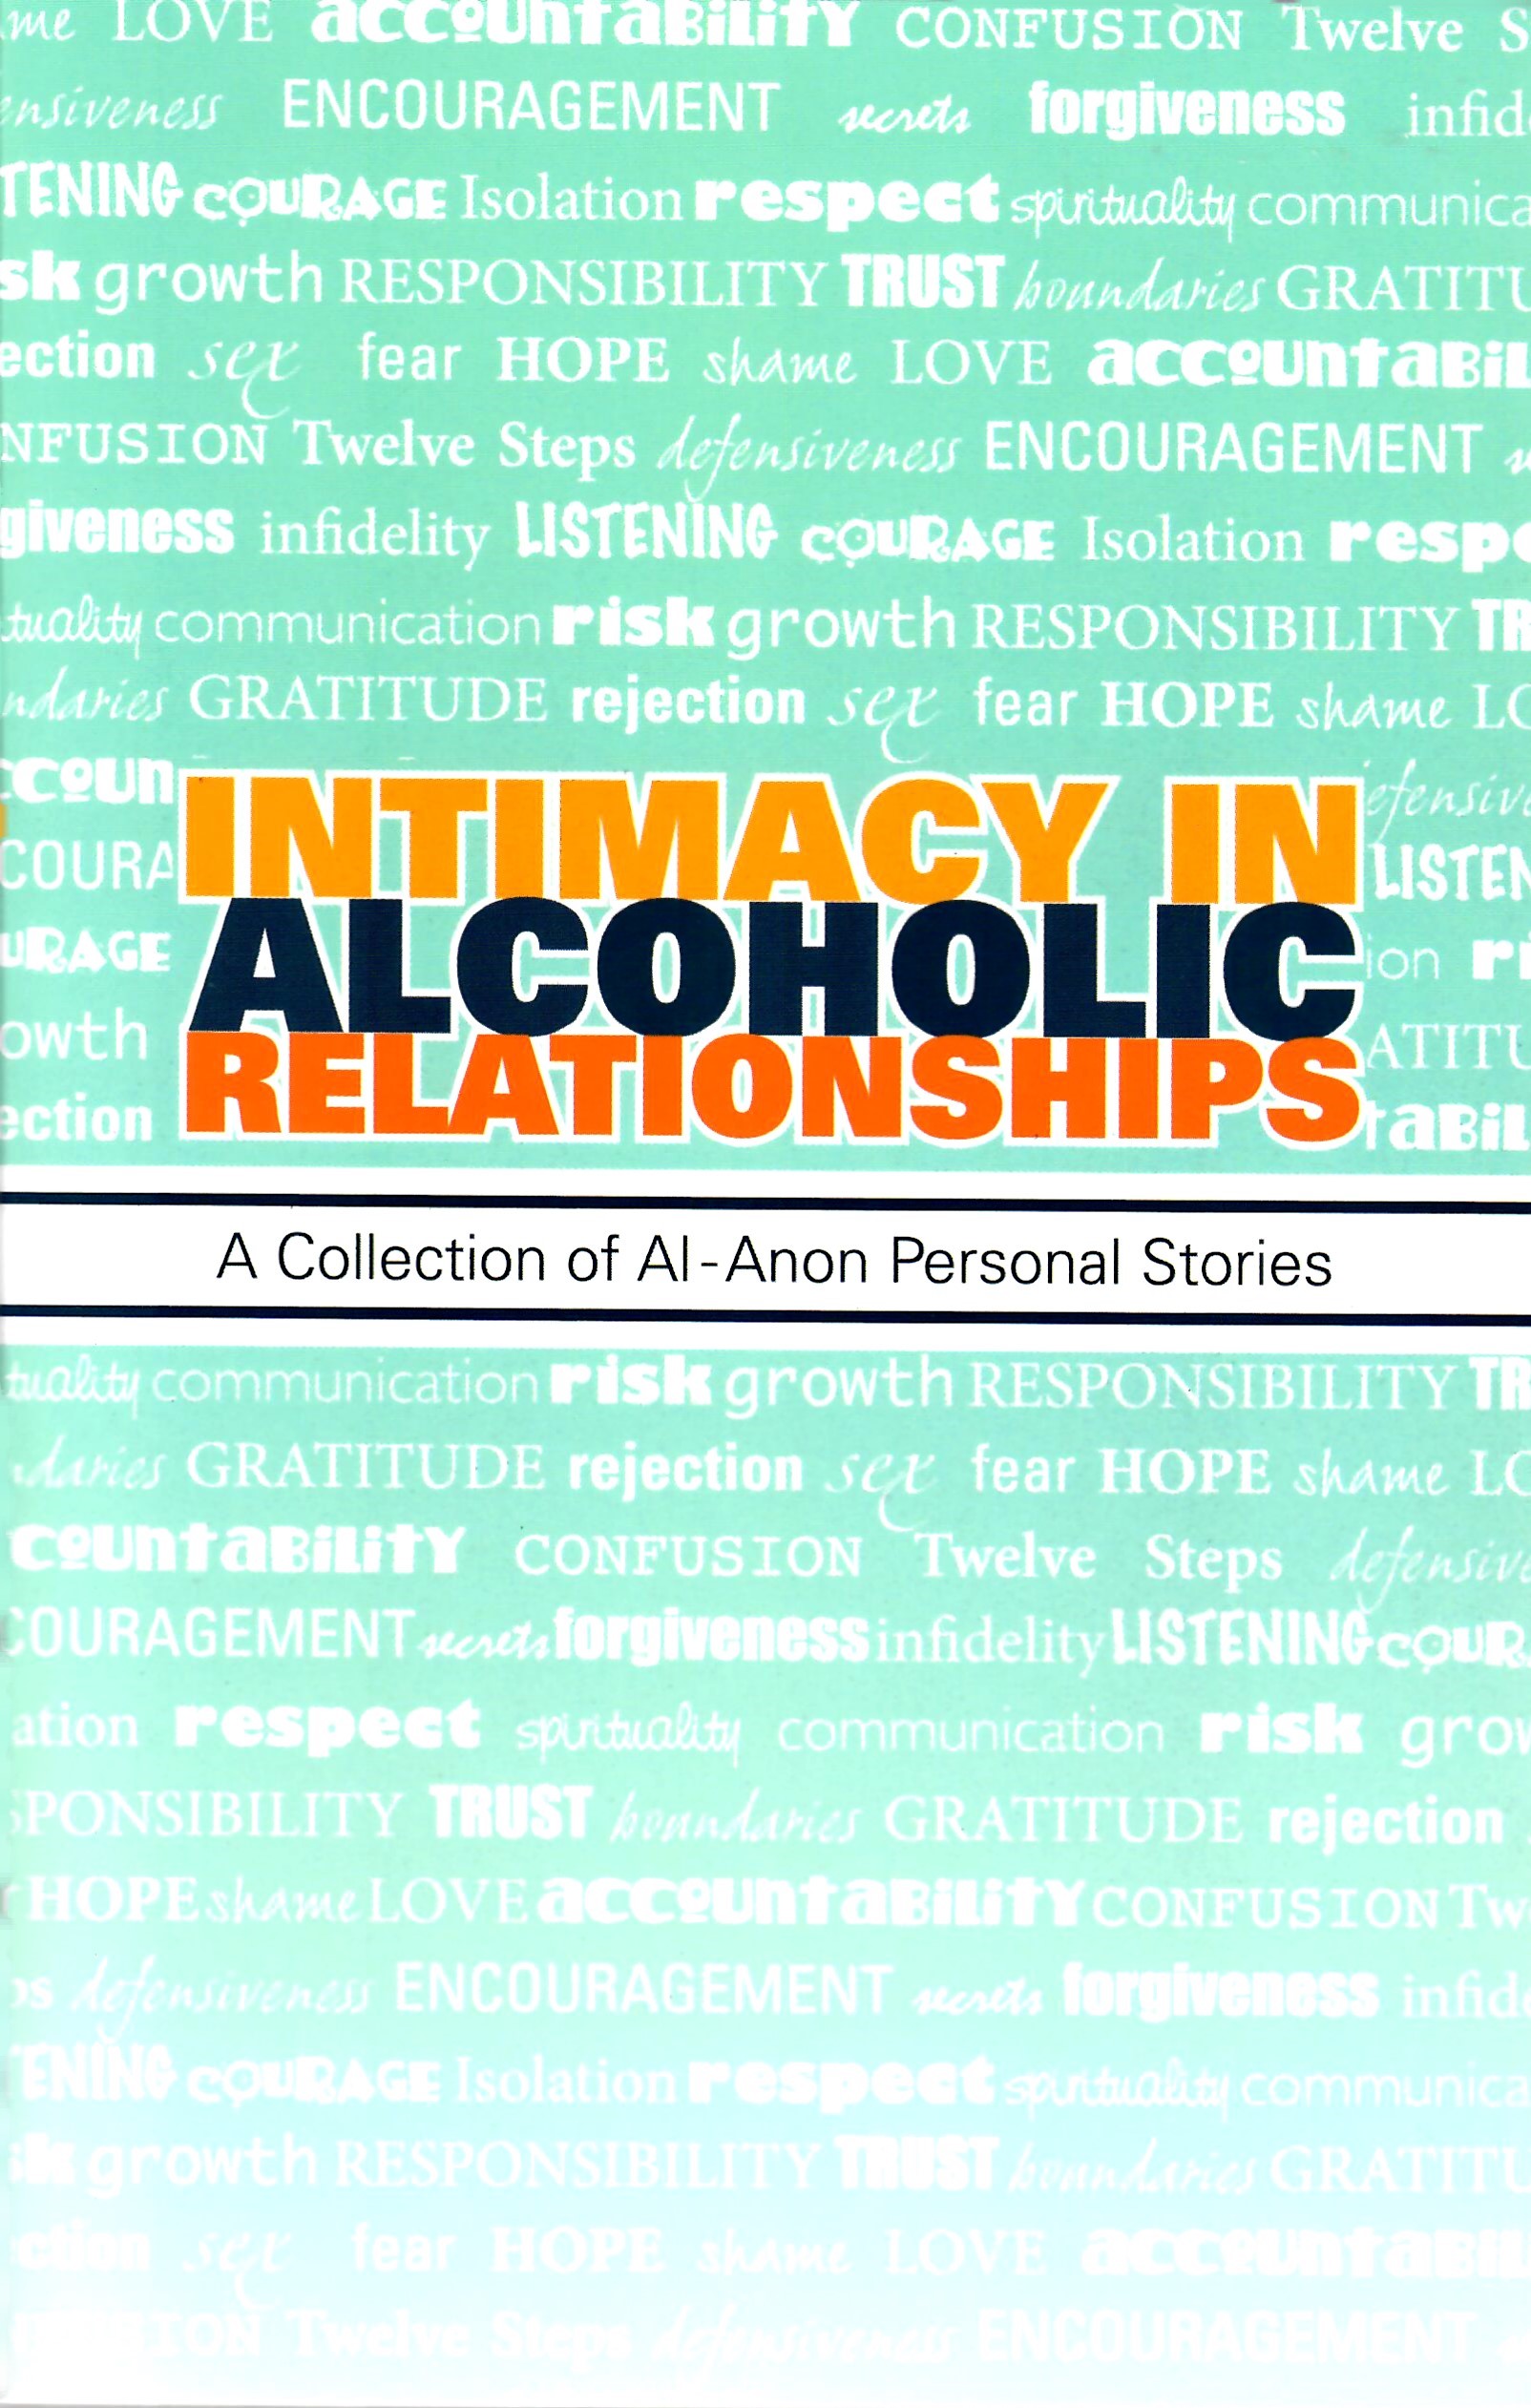 Intimacy in Alcoholic Relationships – A Collection of Al-Anon Personal Stories (Softcover) B-33